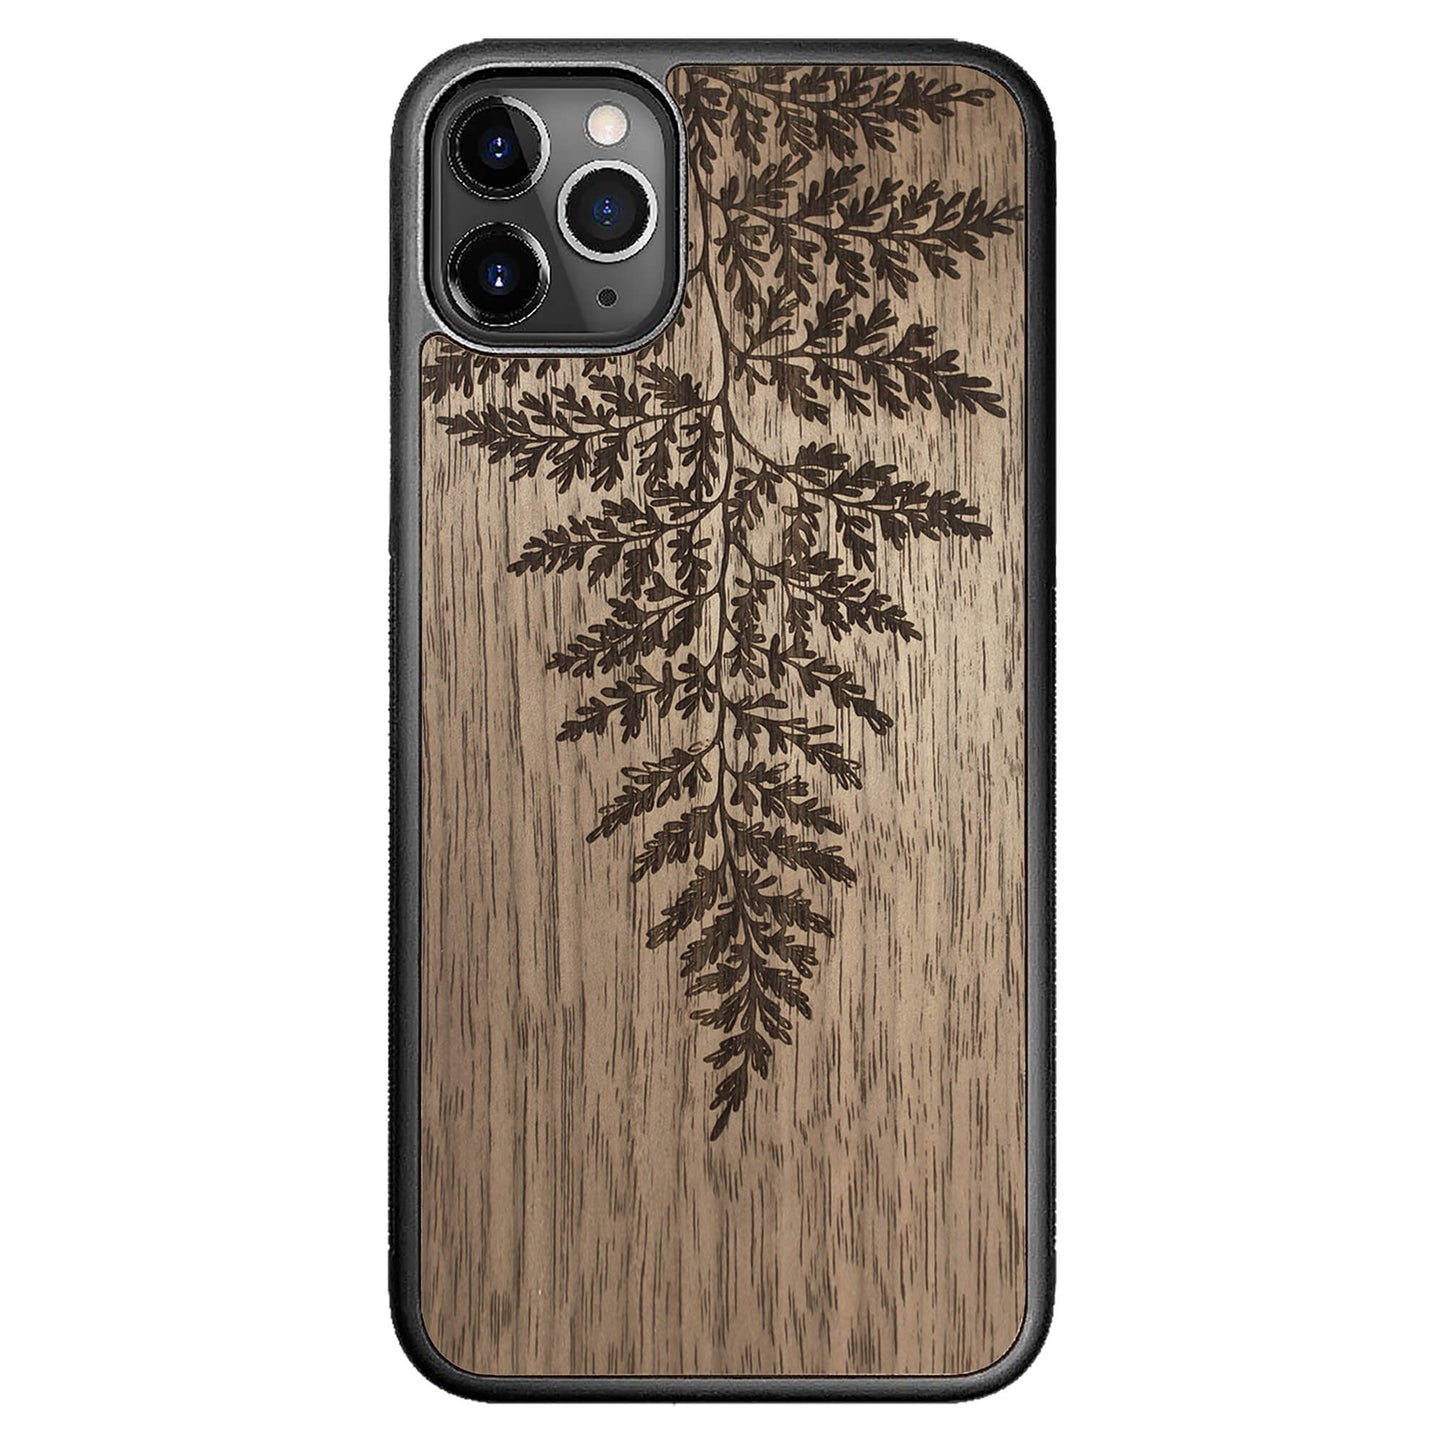 Wooden Case for iPhone 11 Pro Max Fern